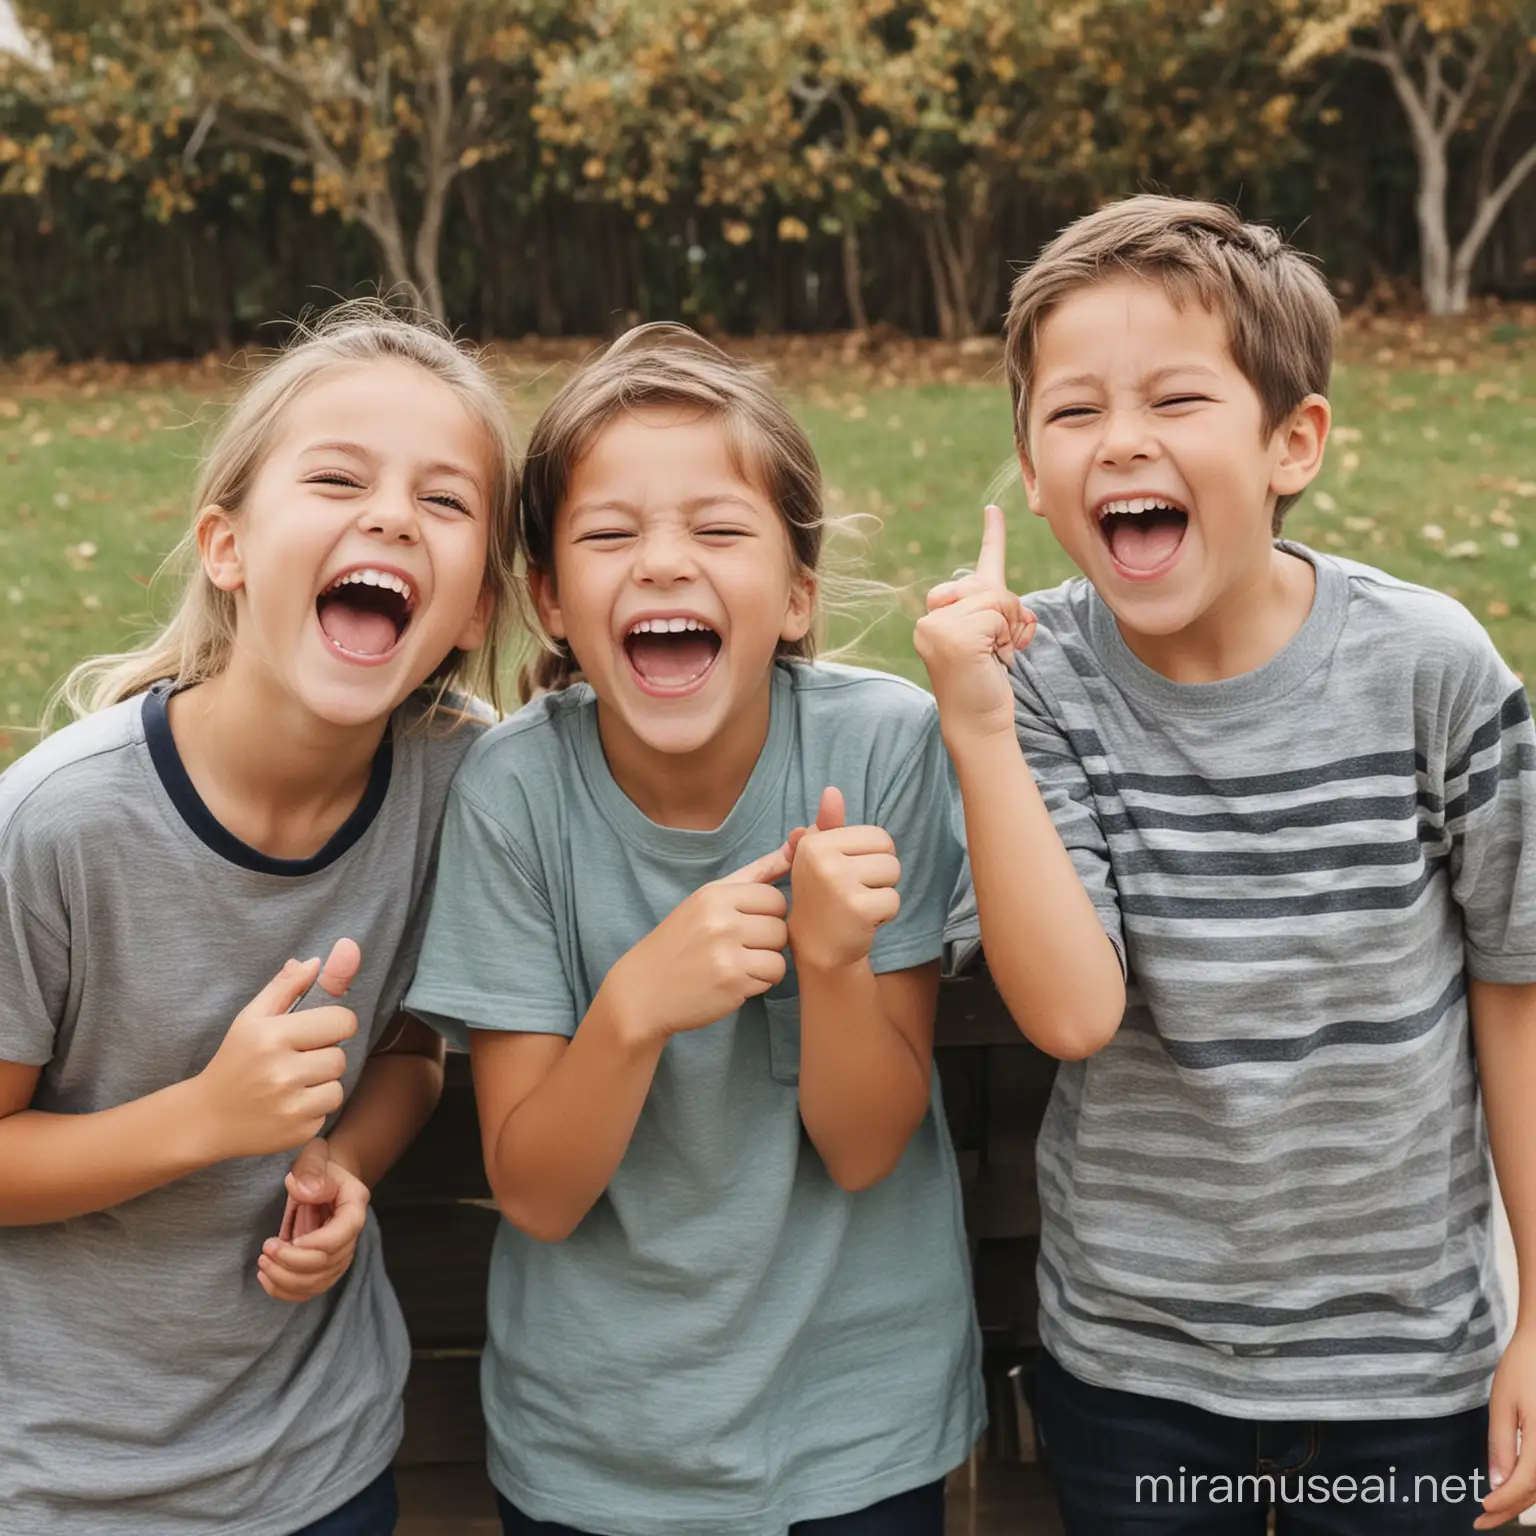 Children Laughing and Pointing at Someone with Mockery